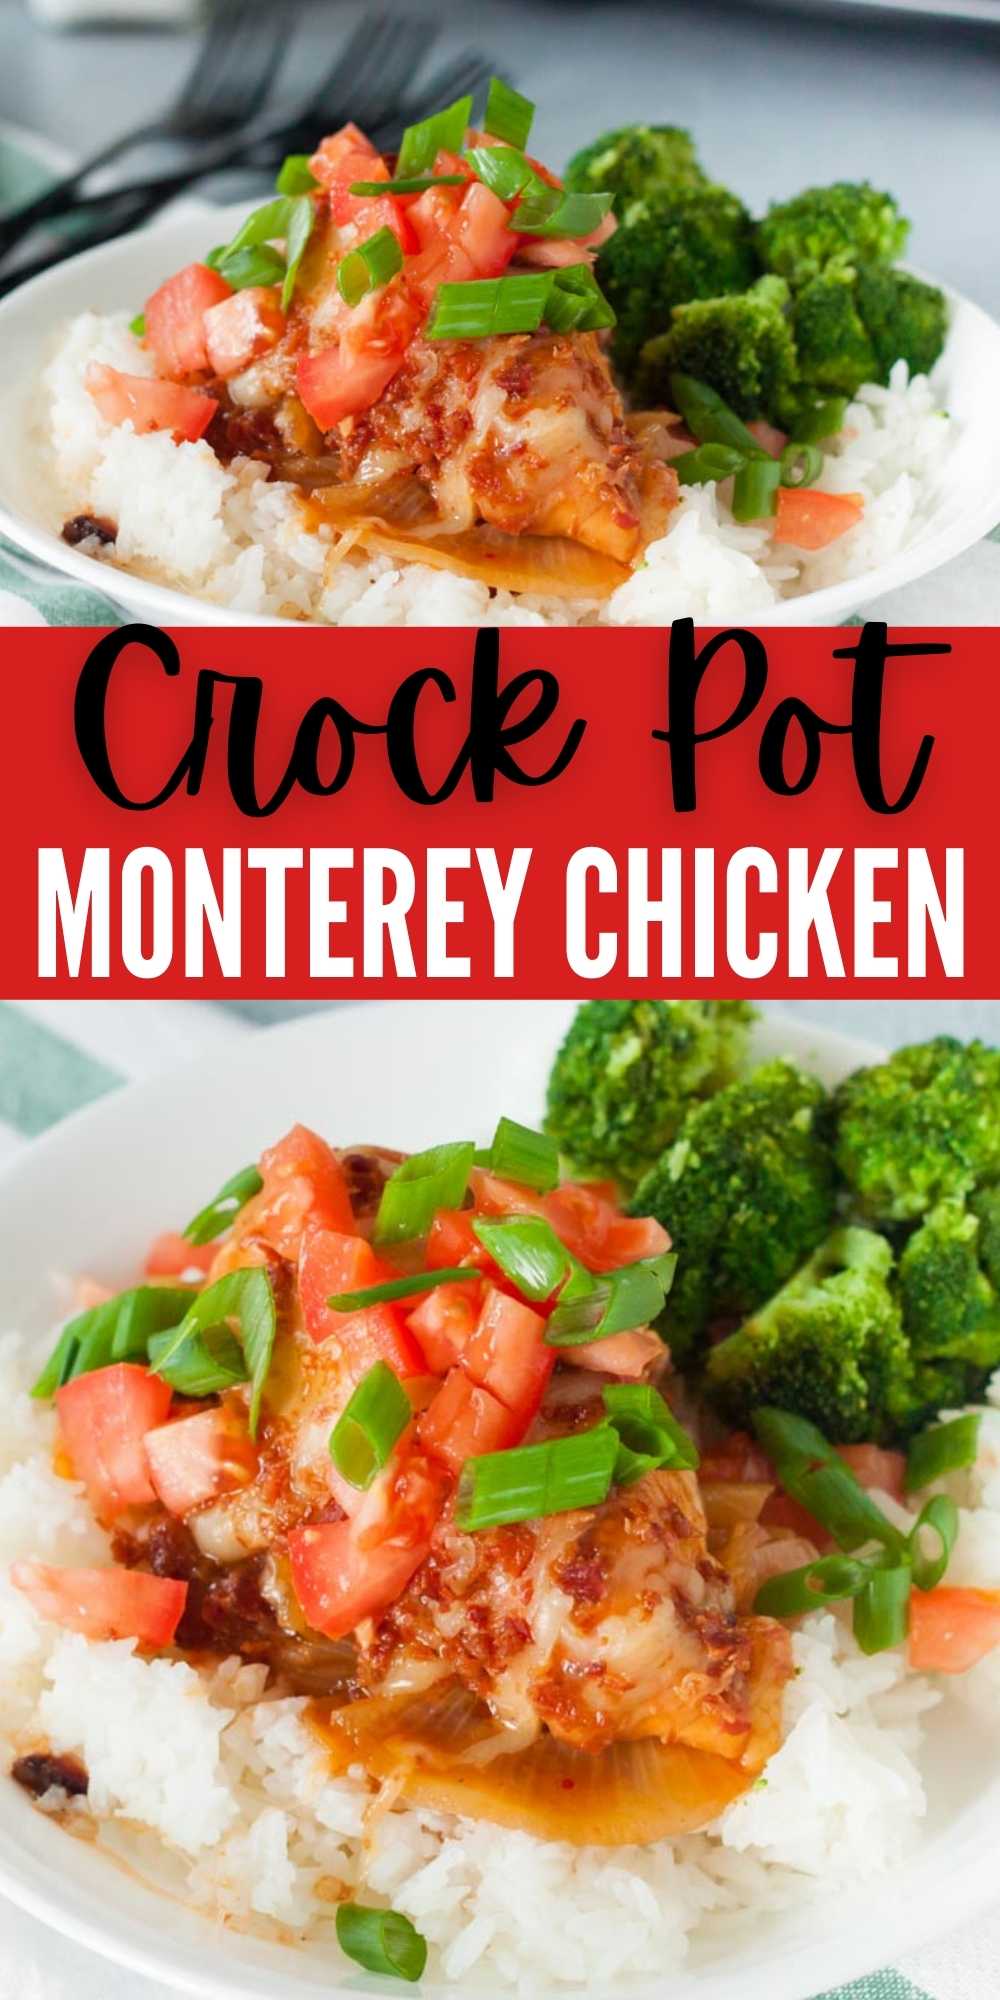 Crock Pot Monterey Chicken Recipe has lots of cheese, barbecue sauce and crispy bacon for the best meal. Try this easy Monterey chicken recipe. It’s an easy and delicious slow cooker recipe recipe! #eatingonadime #crockpotrecipes #slowcookerrecipes #chickenrecipes   
